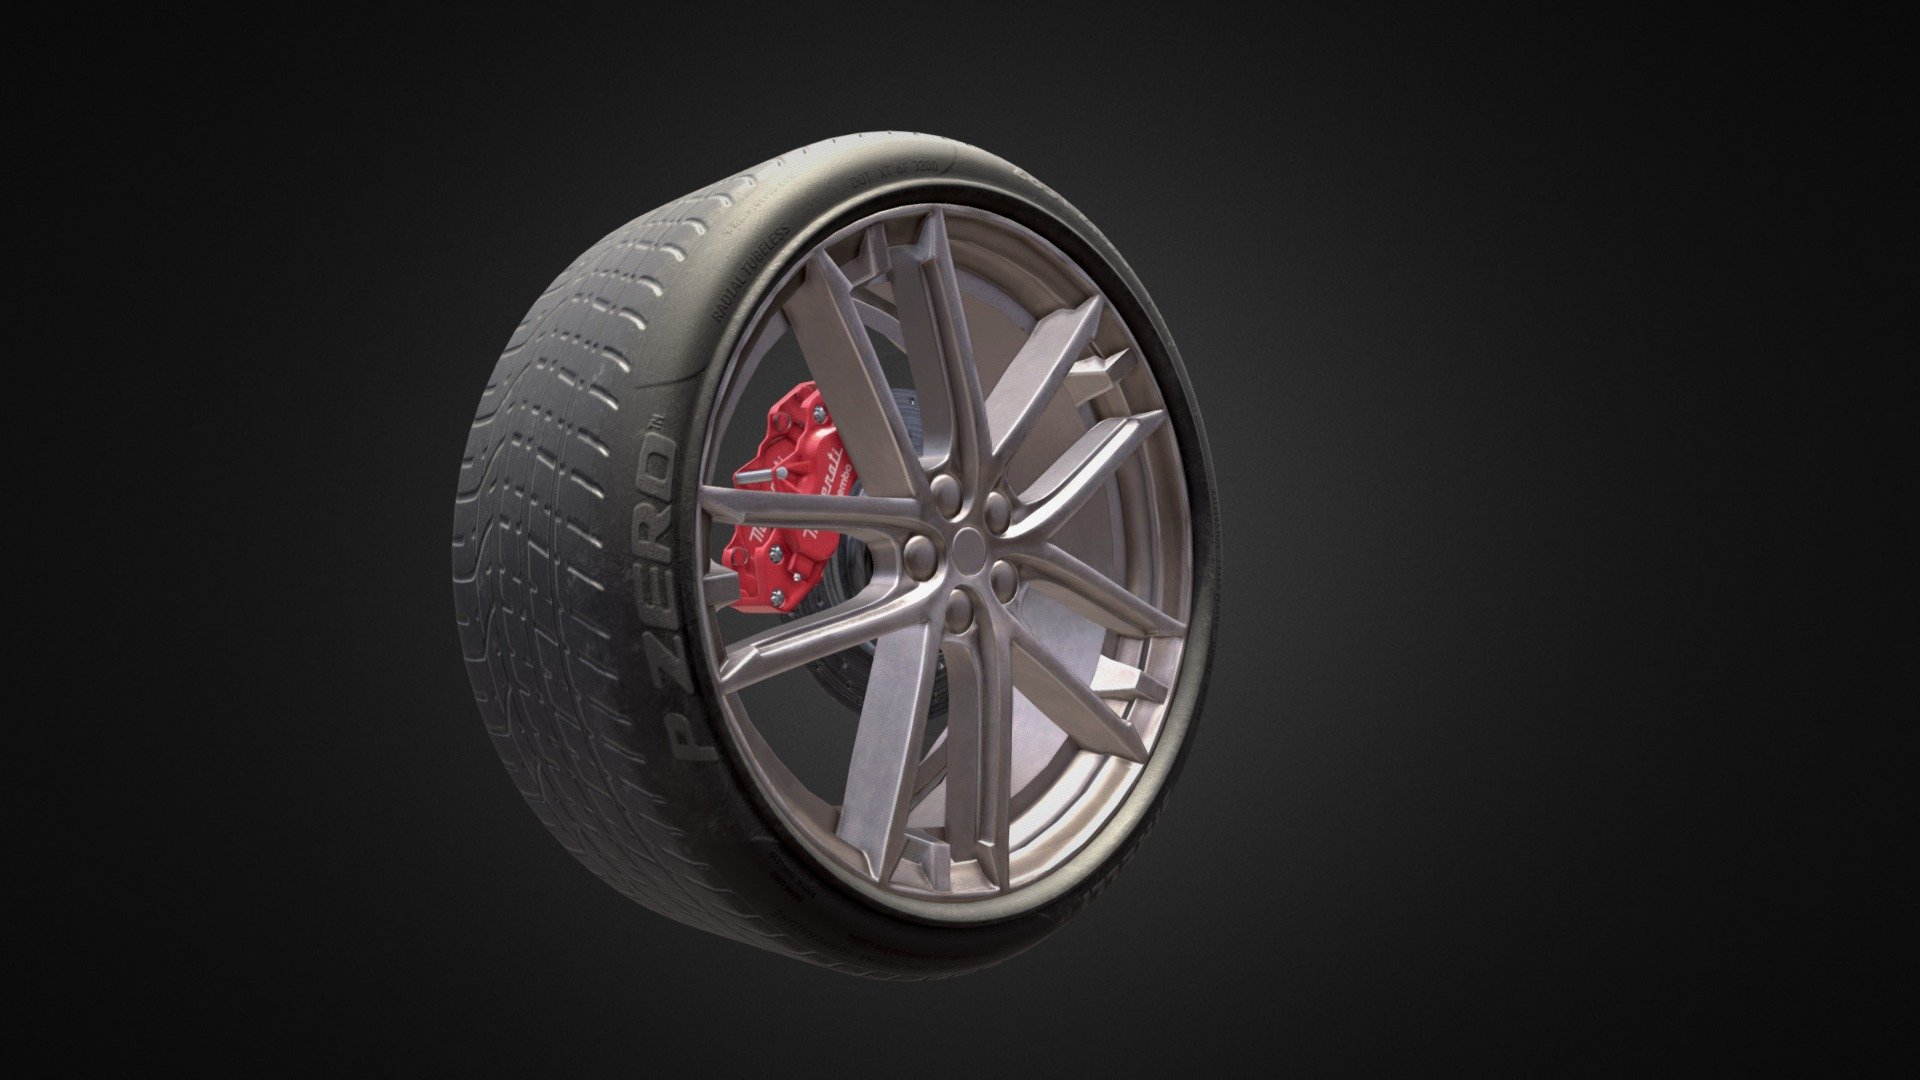 Awesome Maserati Granturismo tyres are highly re-usable for your projects like pro-CG cg cars rendering, games, etc. This will add a lot of realism to your scene.

Features




Modeled in 3ds max

100% PBR textures. Texture is done by a substance painter.

4k Textures.

Single texture set.

Renderings done in iray.

Low poly and High poly exported separate for other 3d software. If you need the high poly contact with me.

Polycounts 10914 | Vertices 11390 | Tries 21624

100% game ready.

UV unwrap in Rizom UV.

Files formats: 3ds Max, Blend , Fbx , Obj, Glb.
 - car tyre game ready p zero - Download Free 3D model by Iftekhar.Tushar 3d model